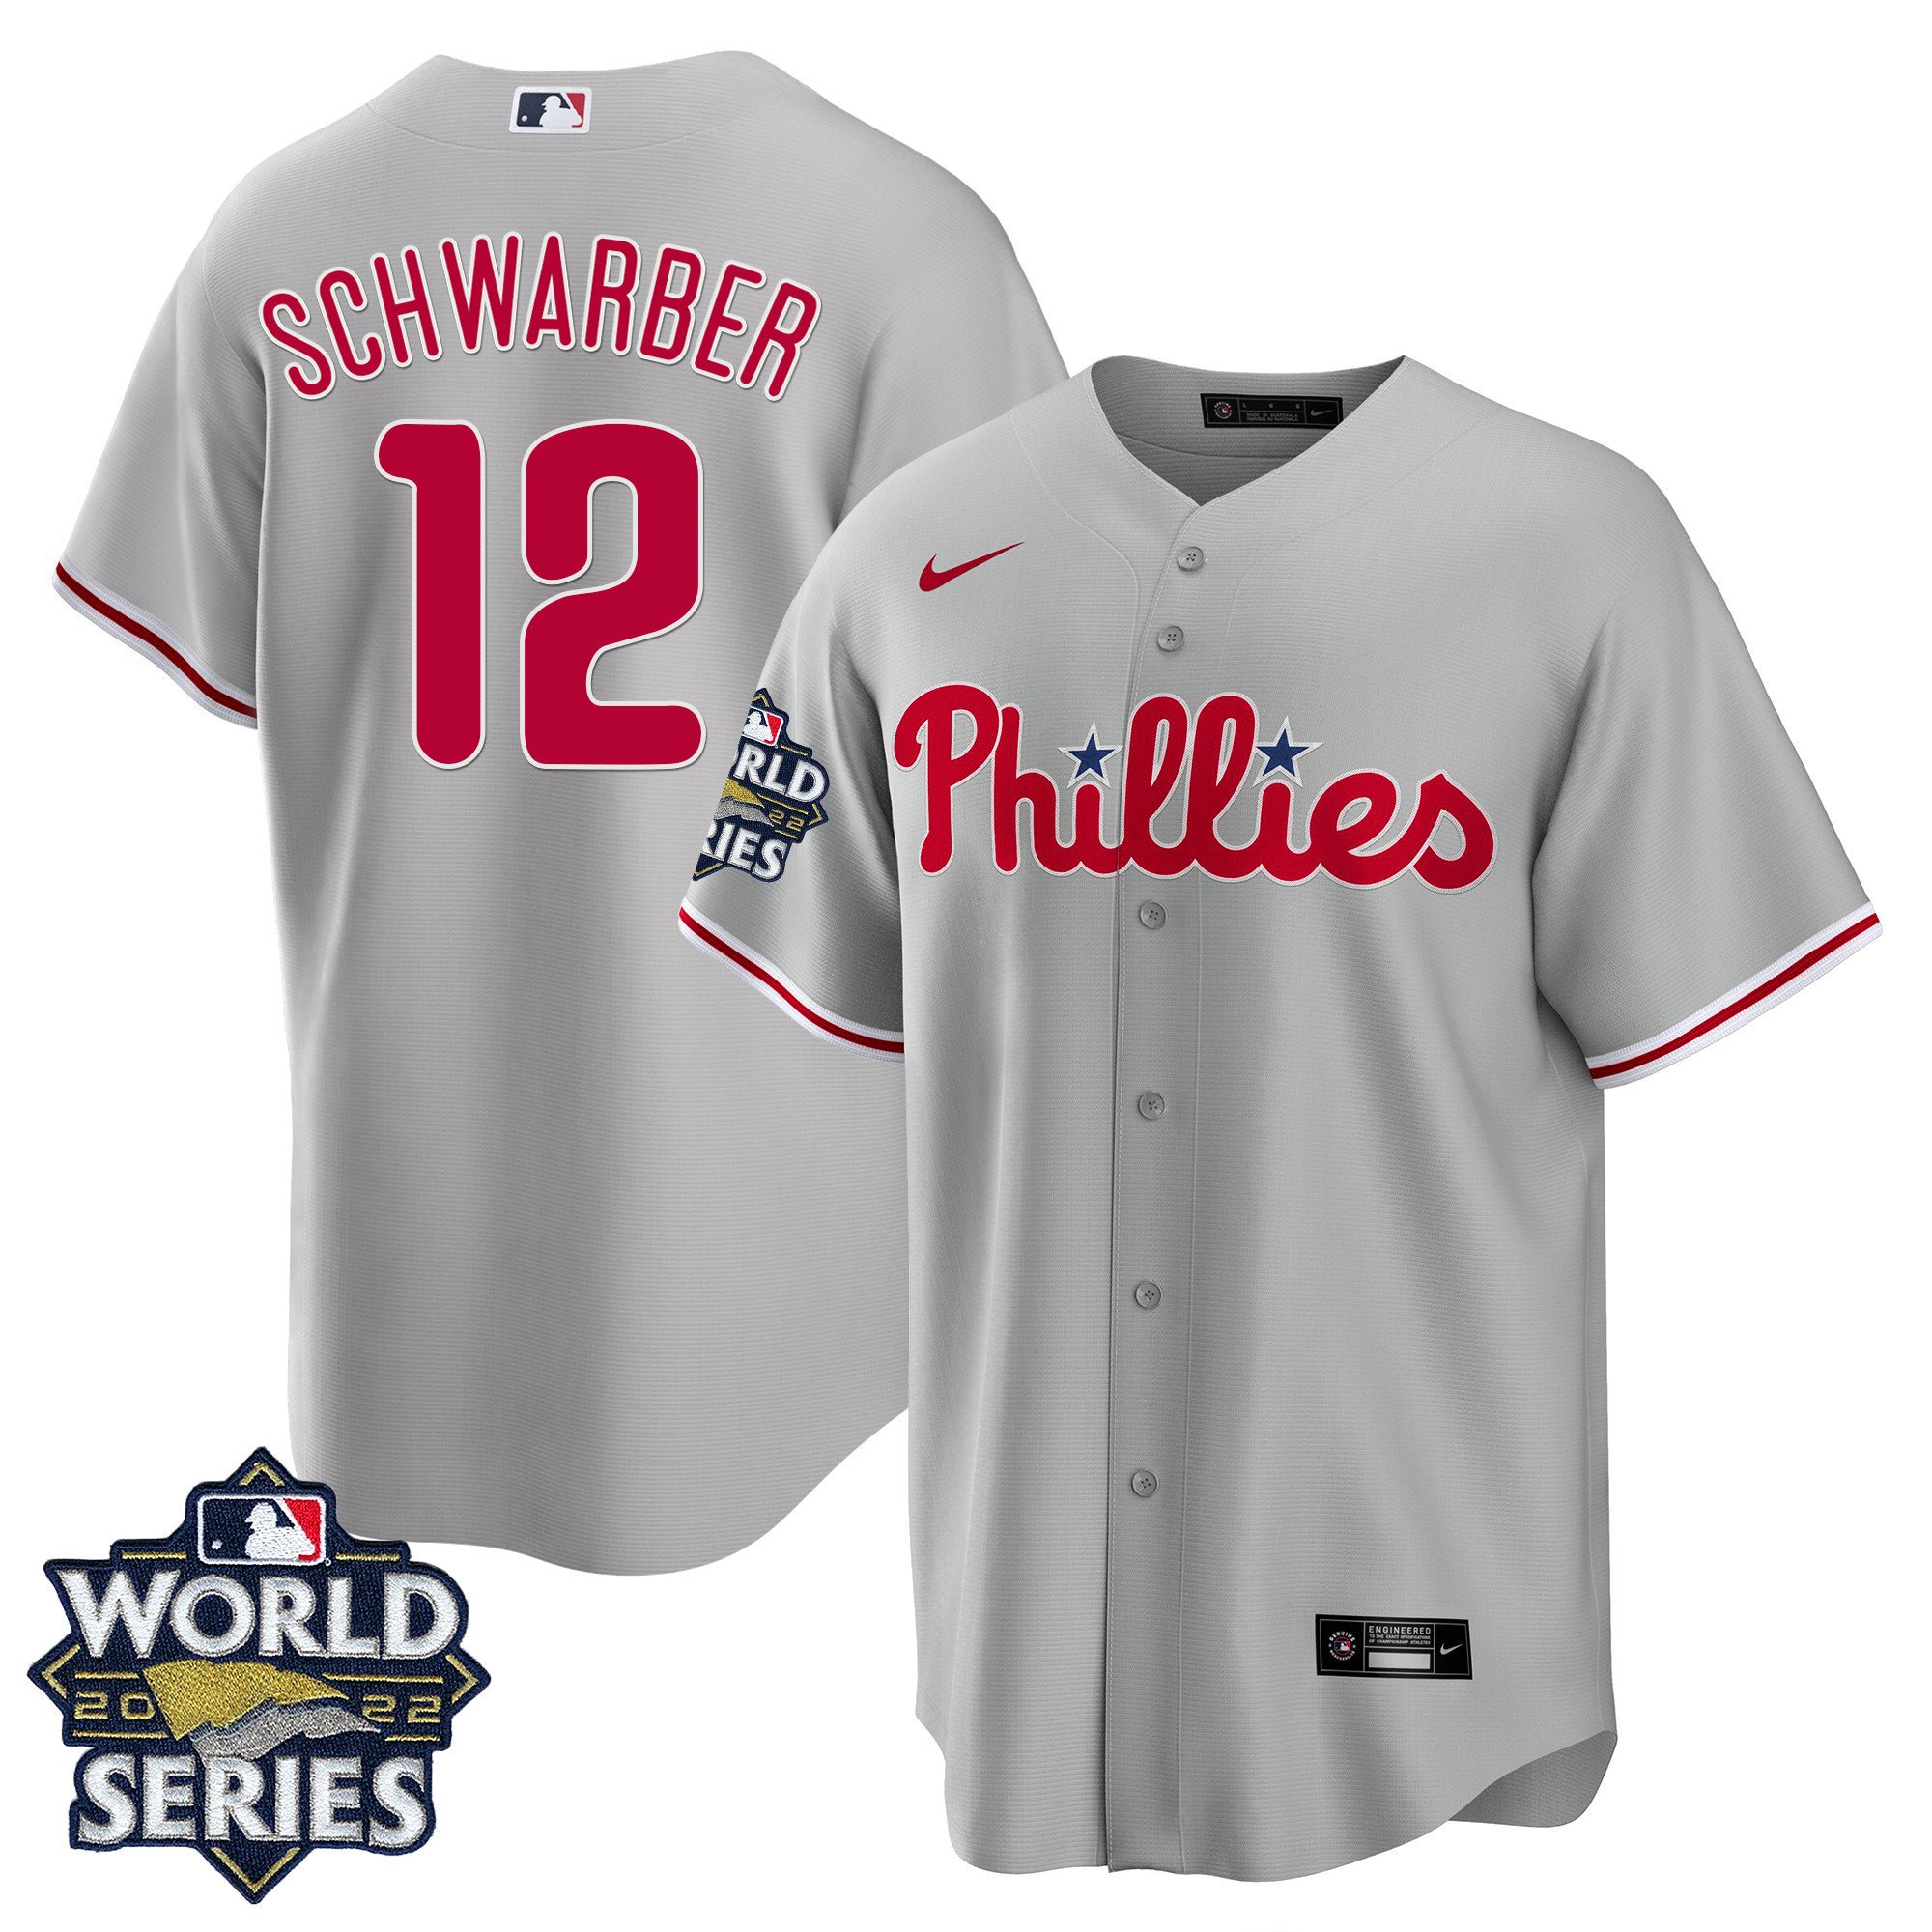 youth schwarber jersey